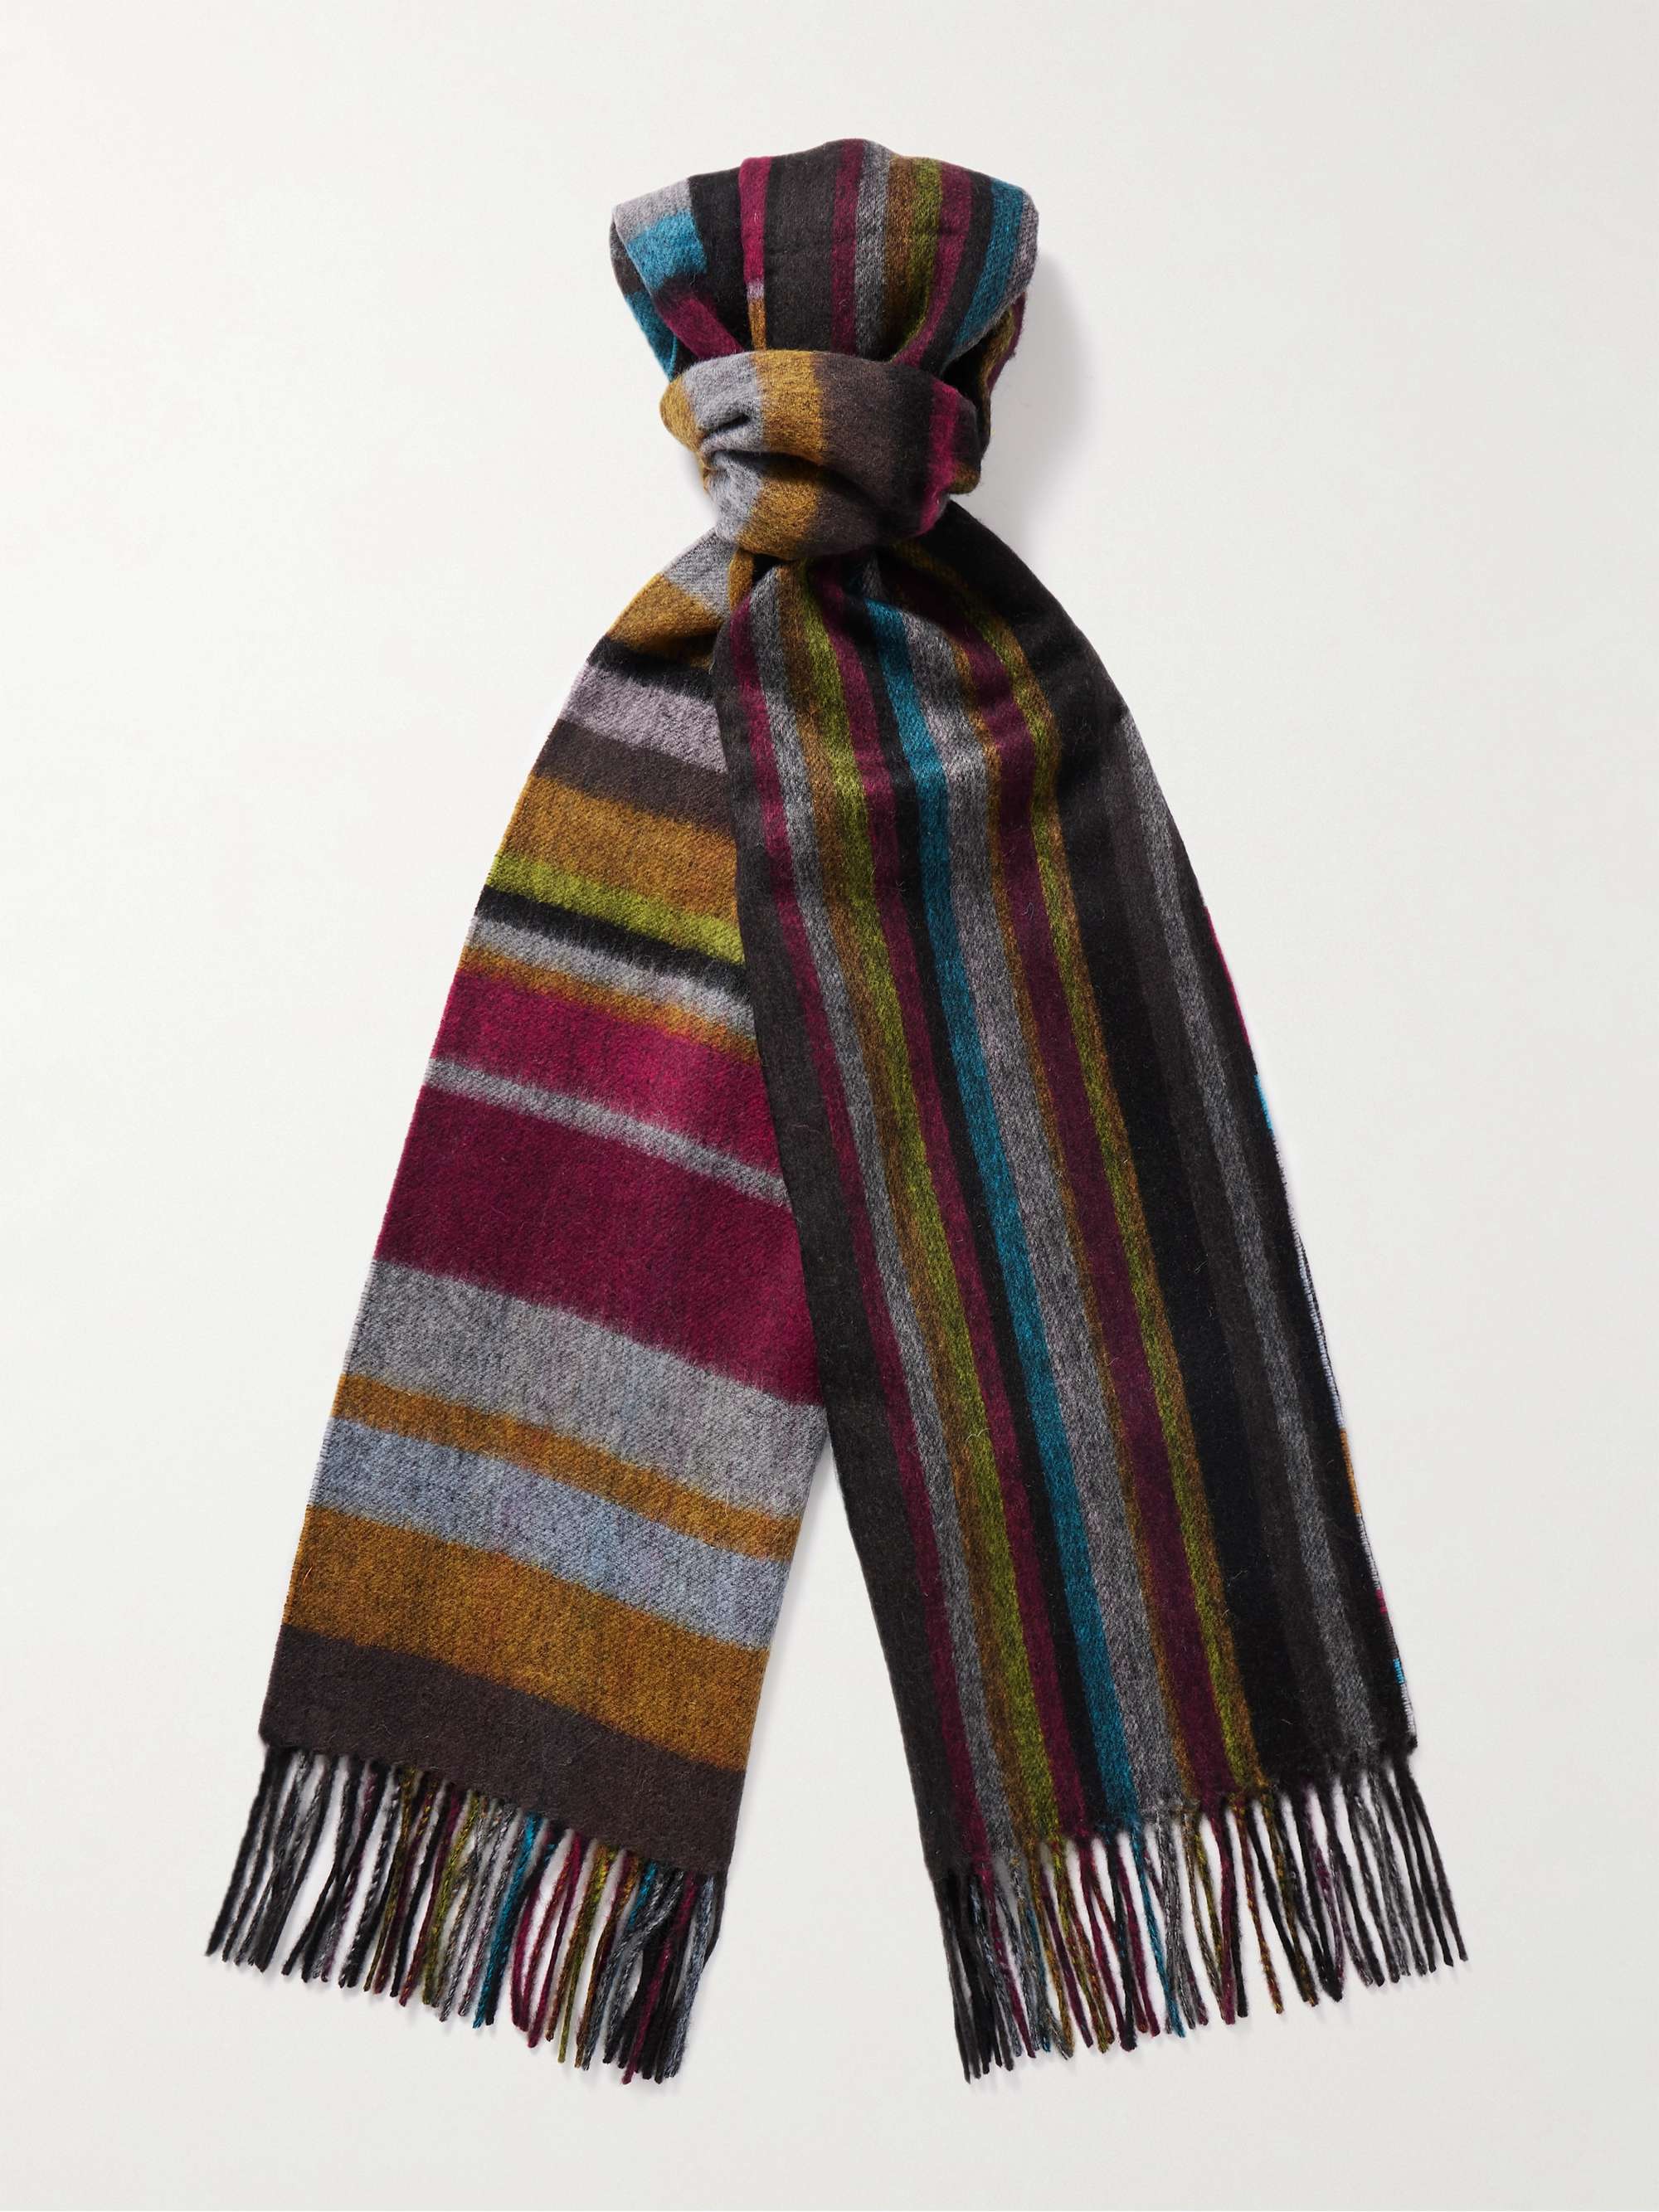 PAUL SMITH Fringed Striped Wool and Cashmere-Blend Scarf for Men | MR PORTER